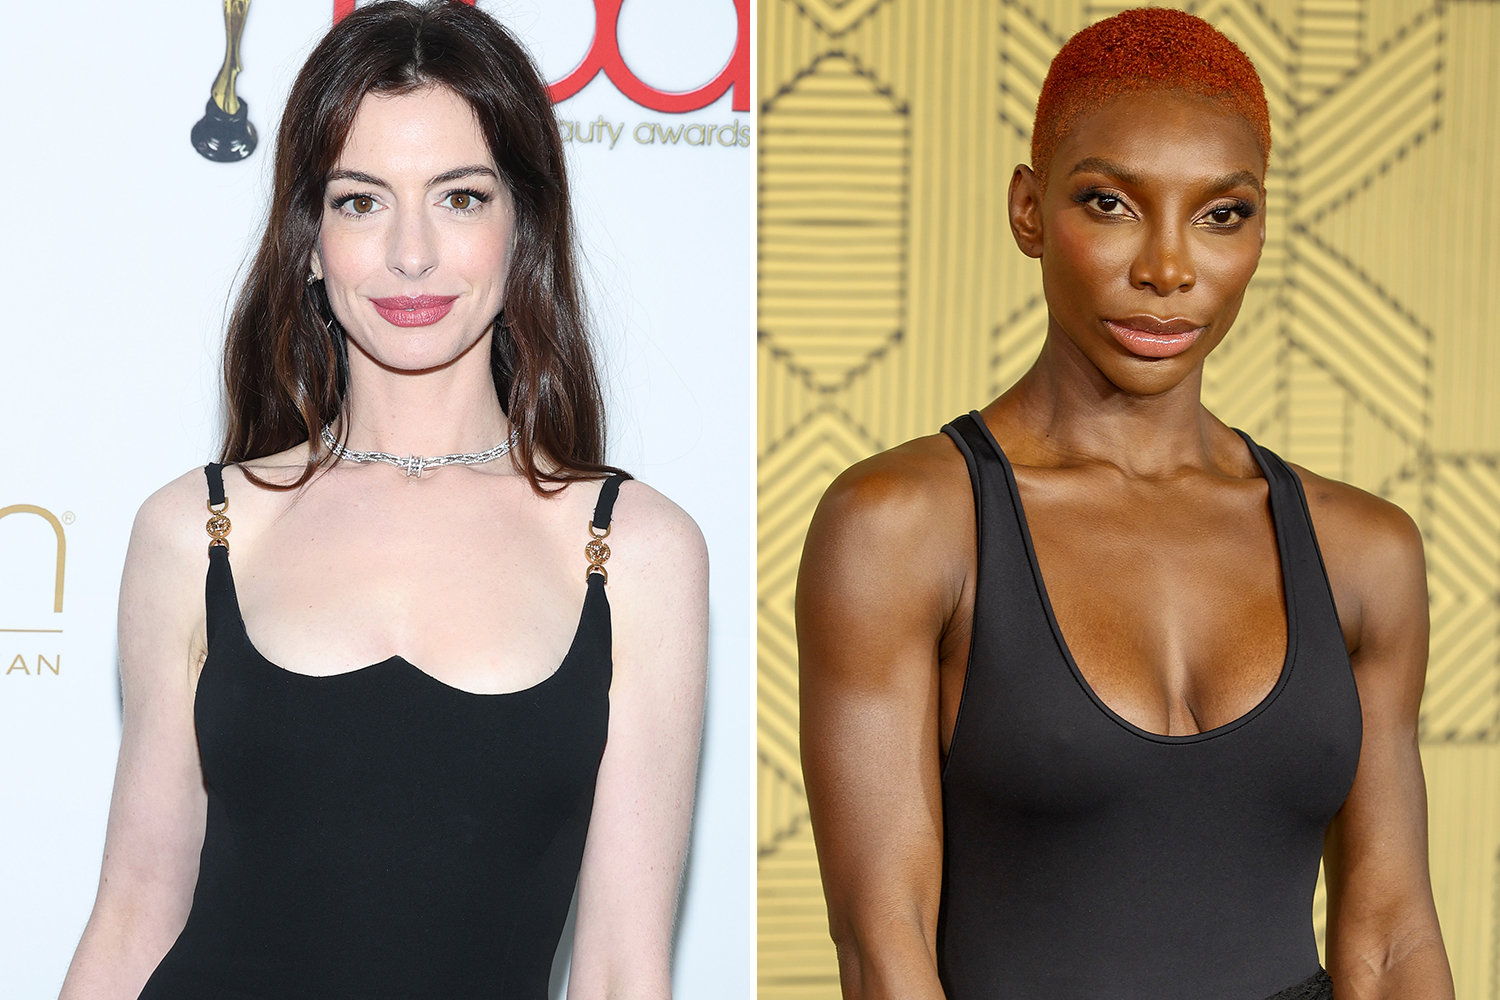 Anne Hathaway to Play a Pop Star in New Movie with Michaela Coel, Music by Charli XCX